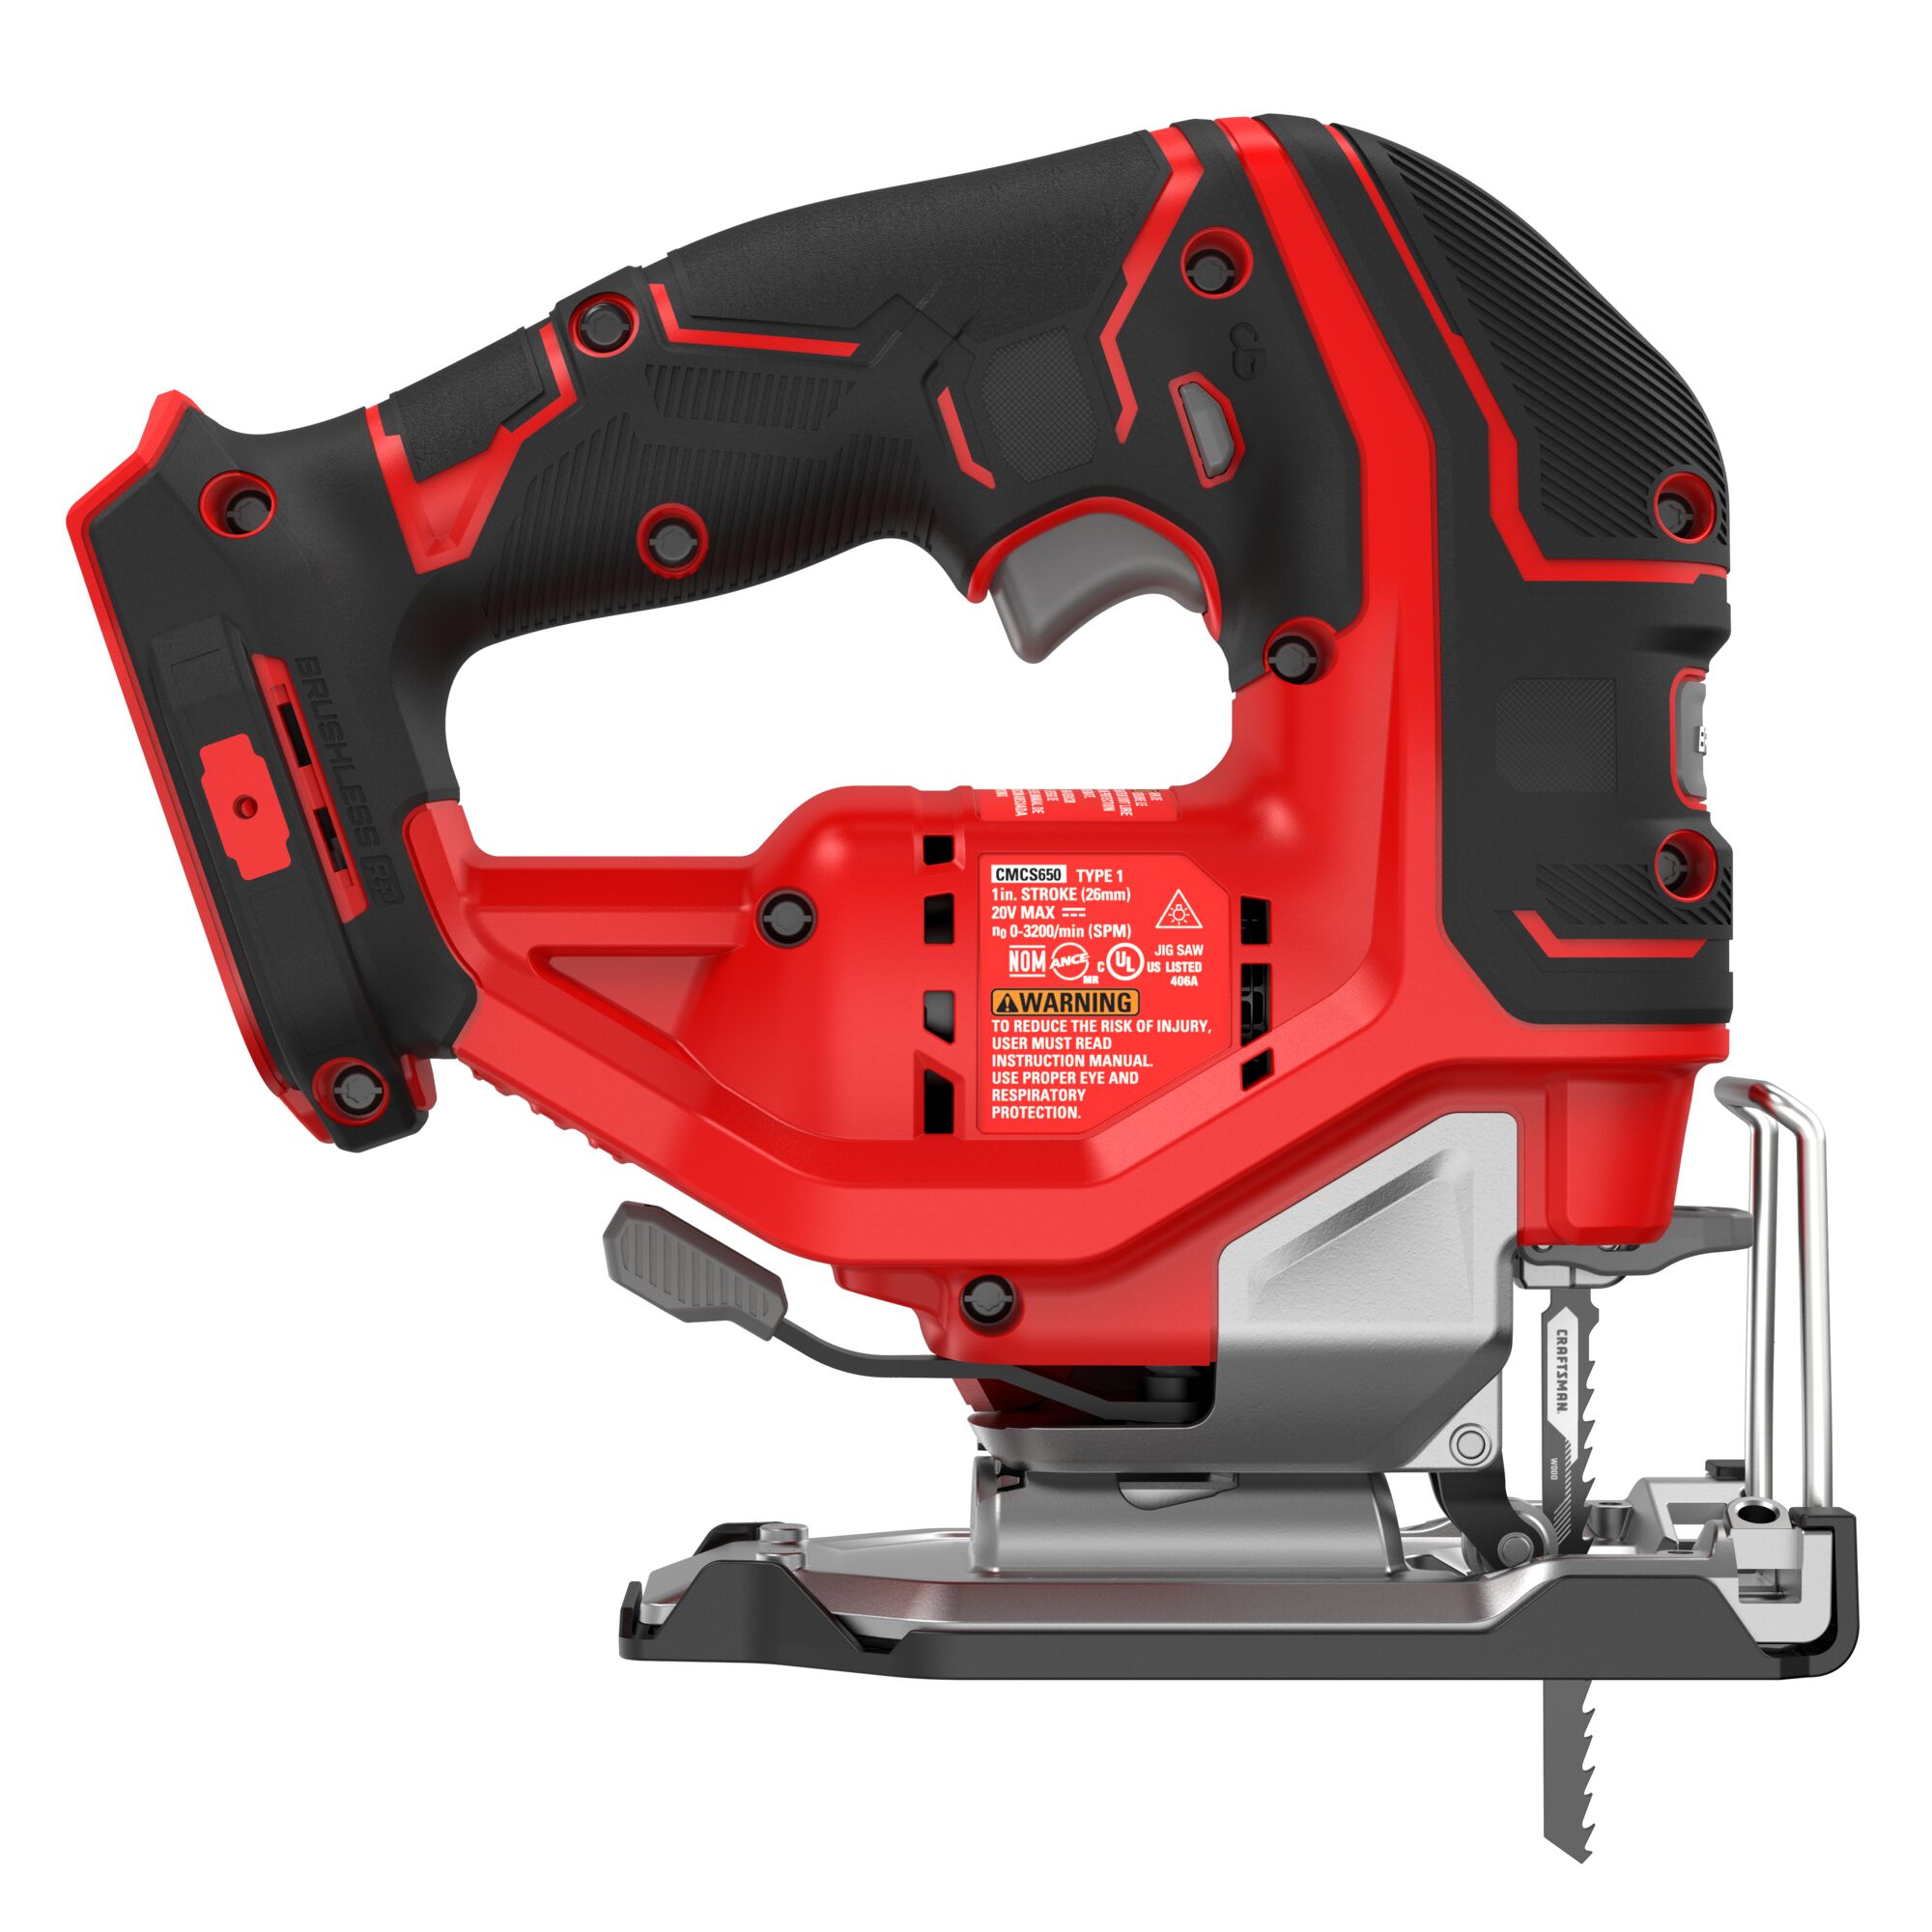 View of CRAFTSMAN Jig Saw on white background